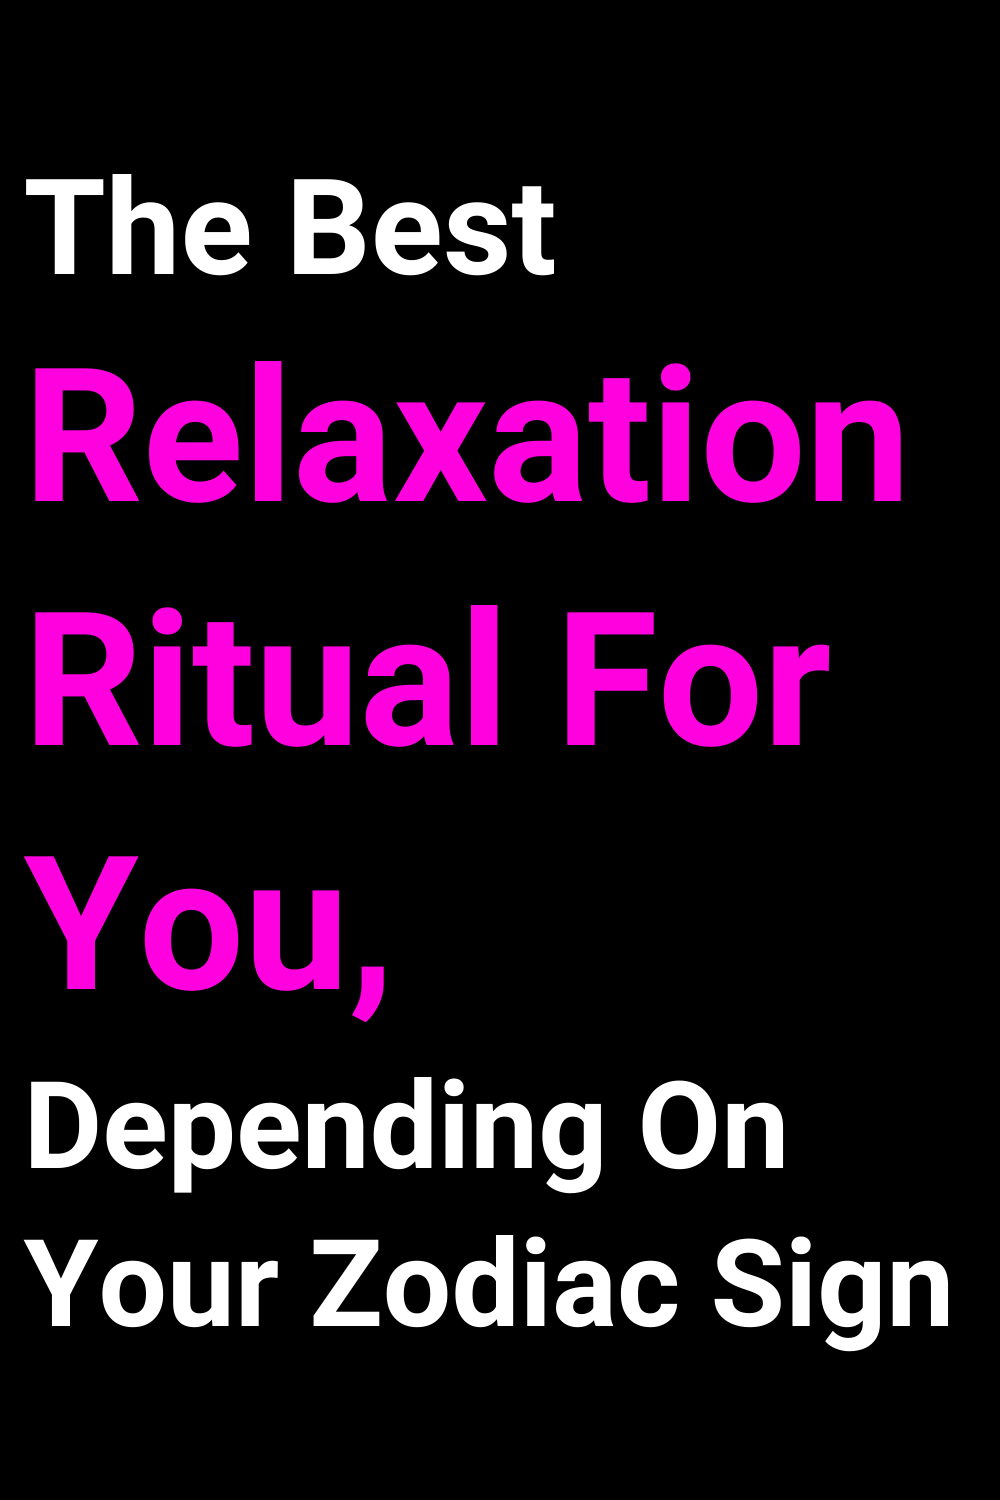 The Best Relaxation Ritual For You, Depending On Your Zodiac Sign